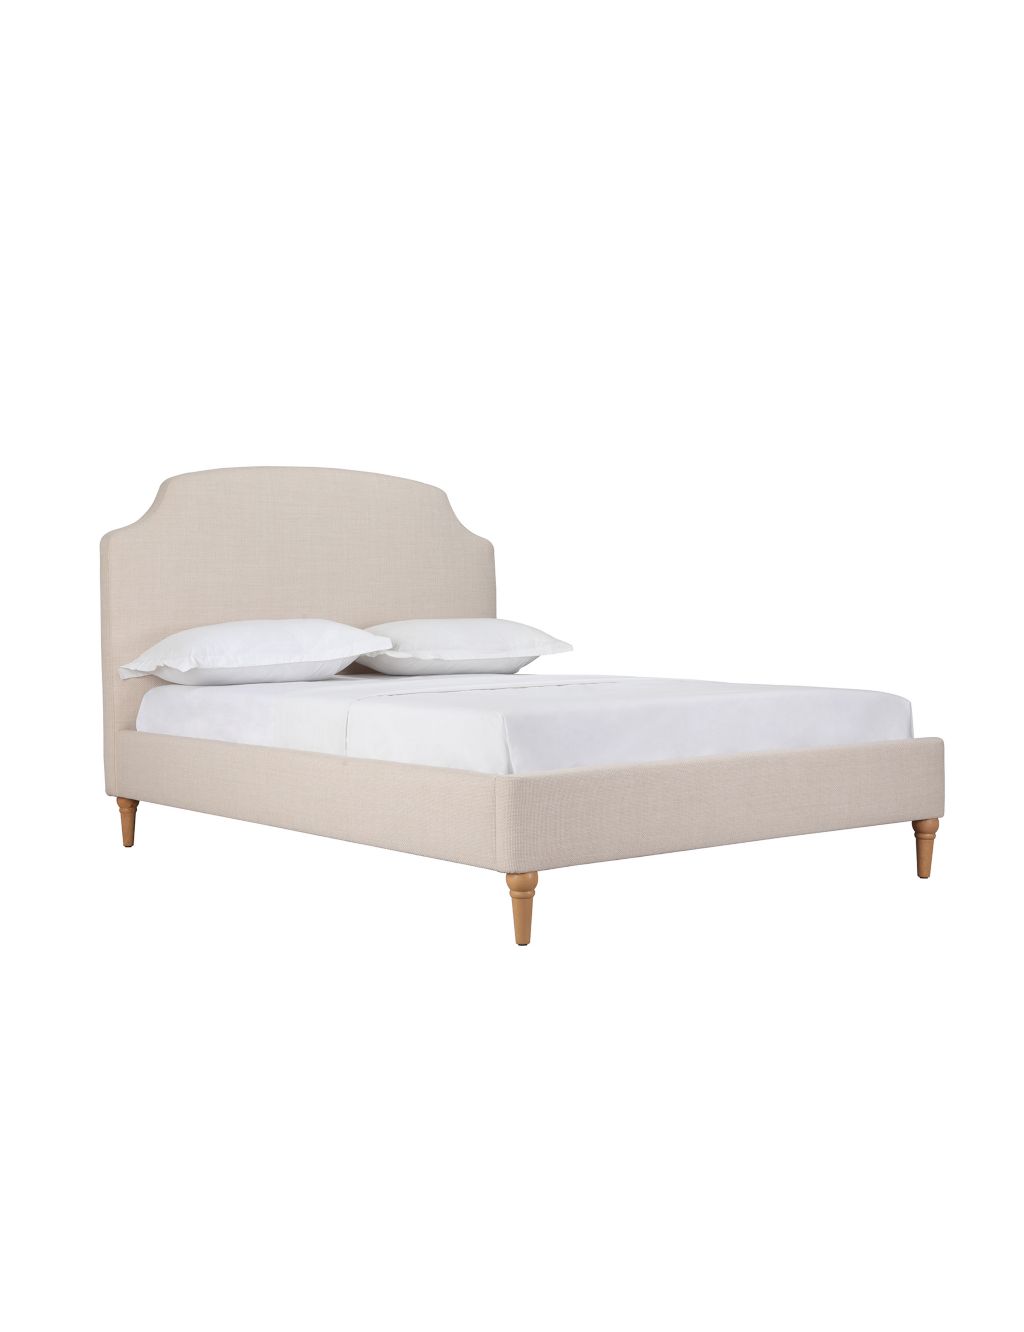 Connie Upholstered Bed